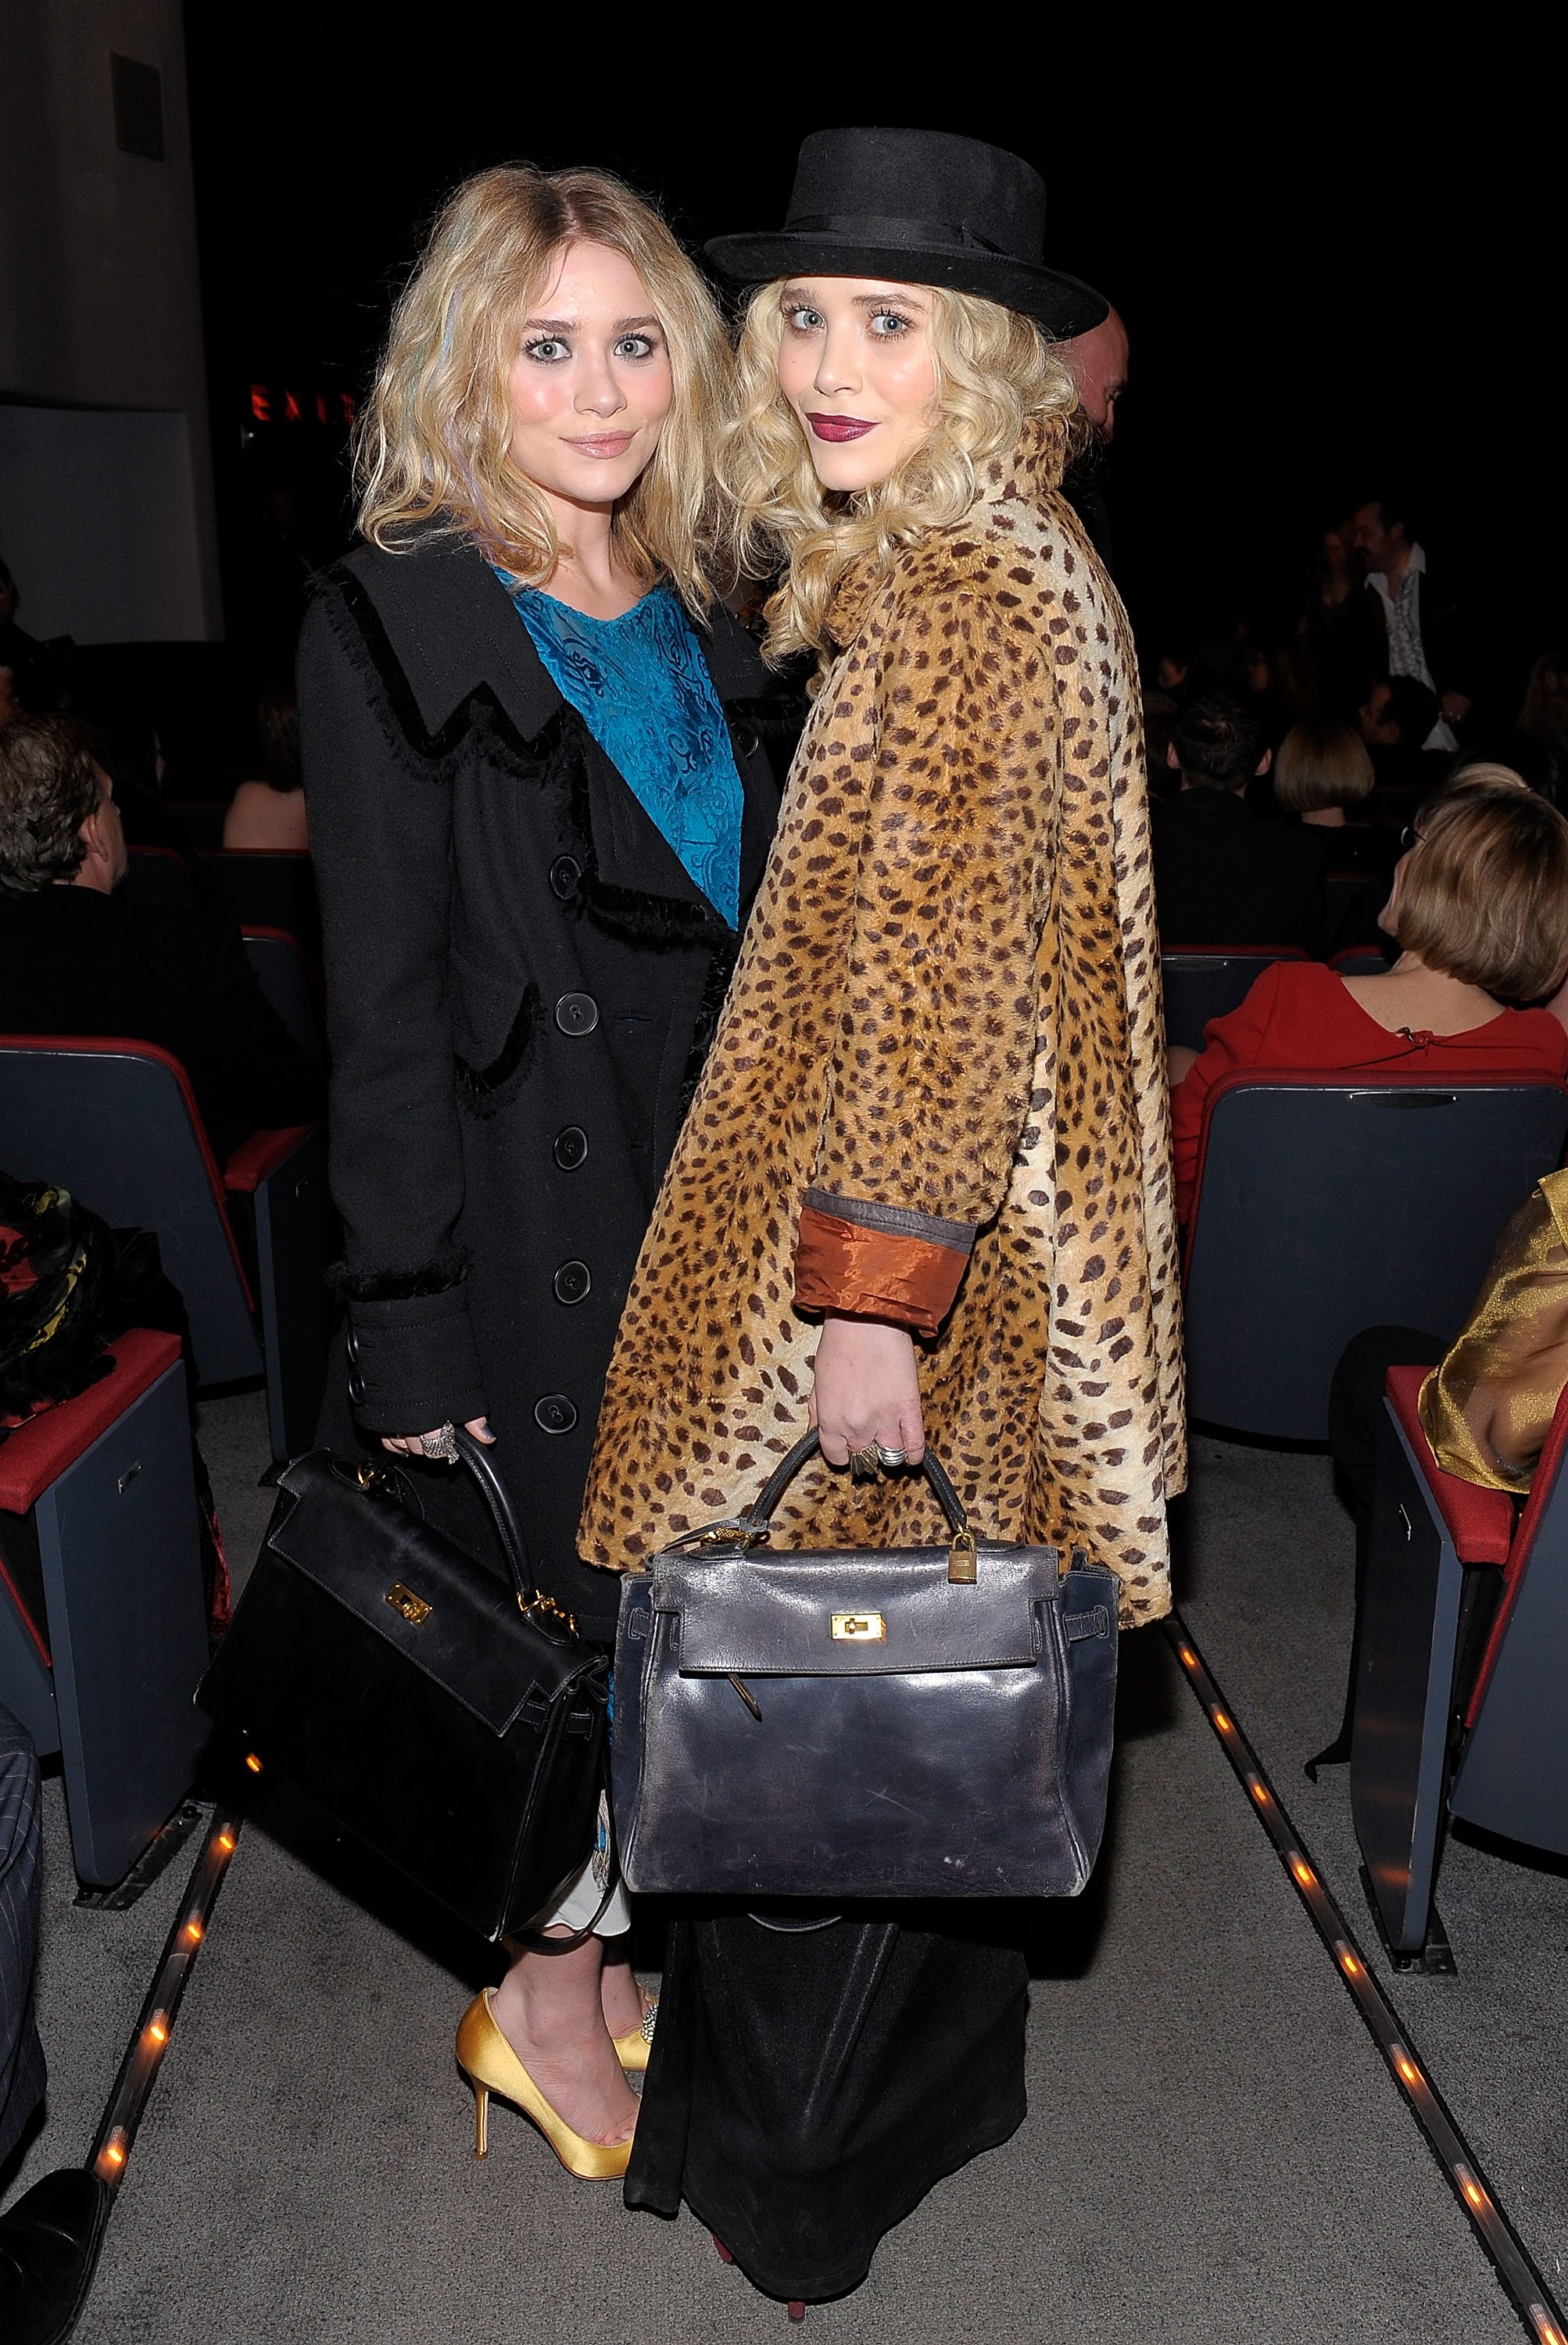 Actors Ashley Olsen and Mary-Kate Olsen attend the MoMA's Second Annual Film Benefit, Honoring Tim Burton at the MOMA on November 17, 2009 in New York.